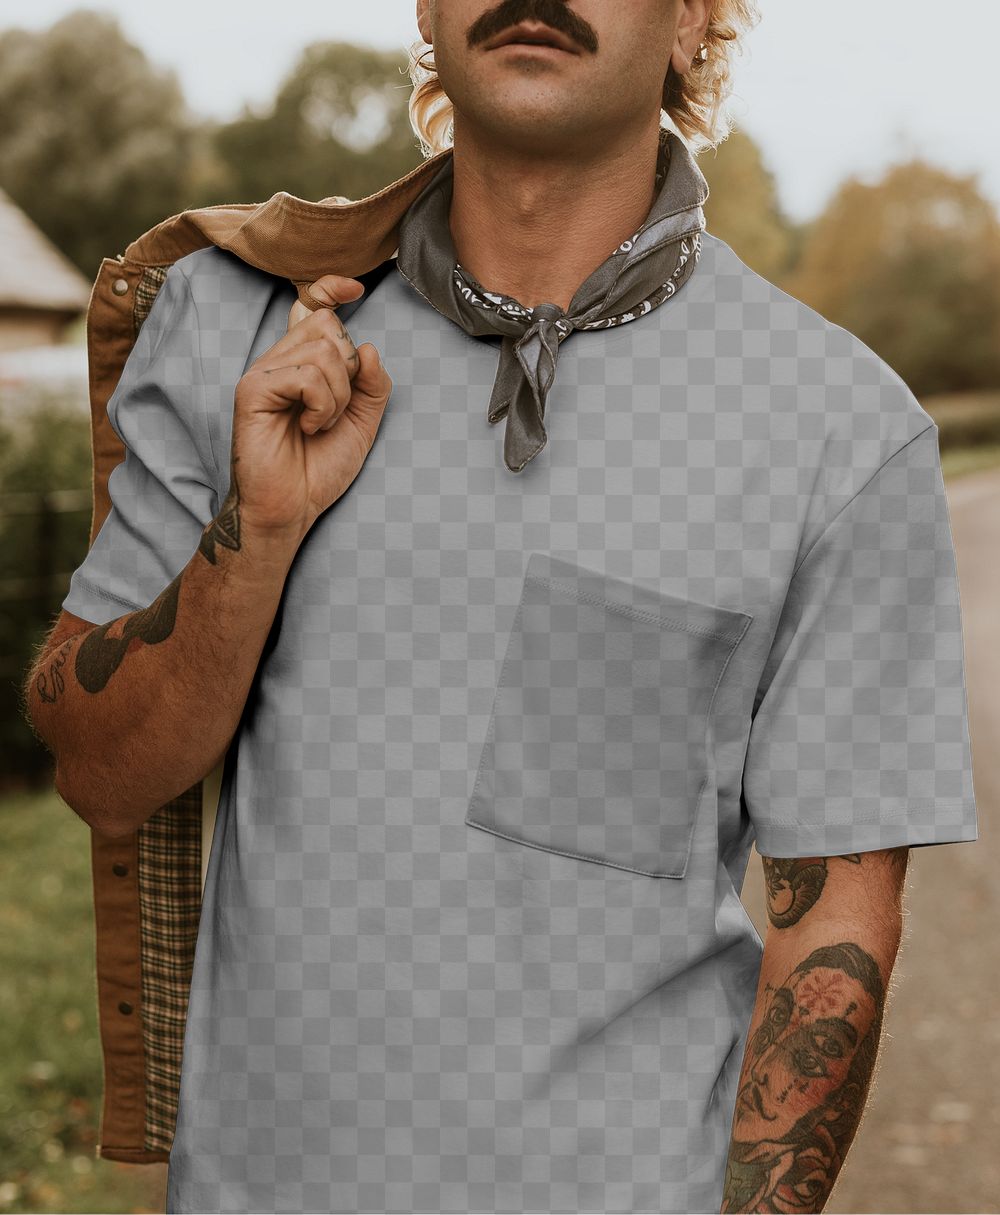 T-shirt png mockup on casual men's fashion outdoor shoot